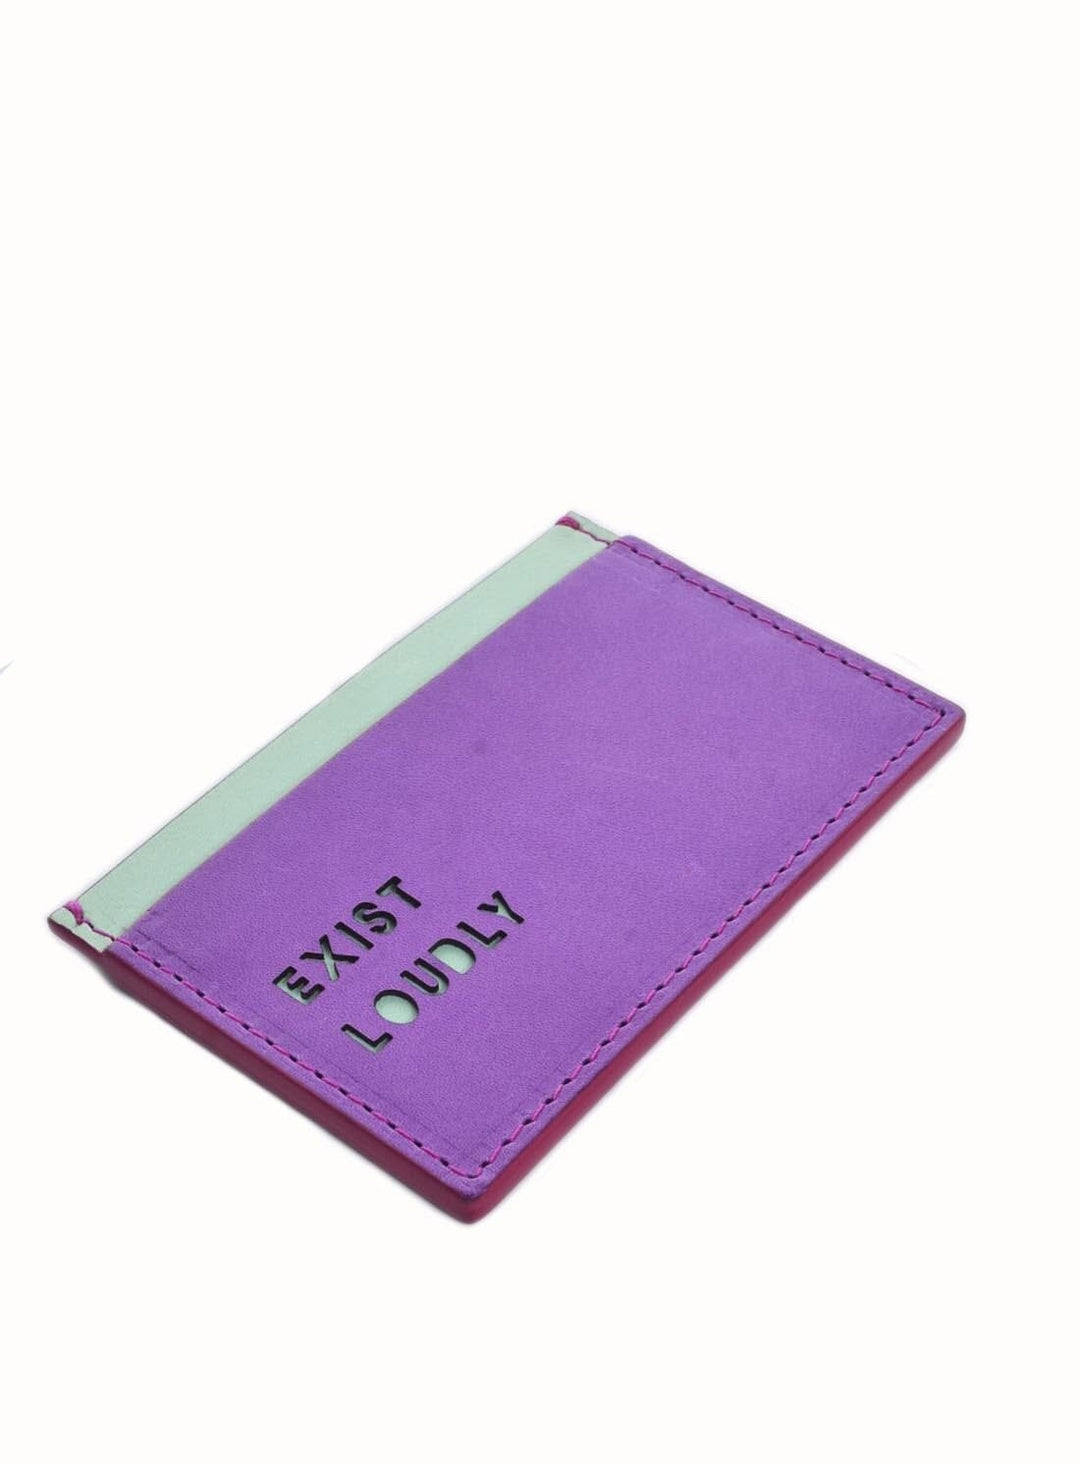 Exist Loudly Card Holder Accessories YBDFinds 